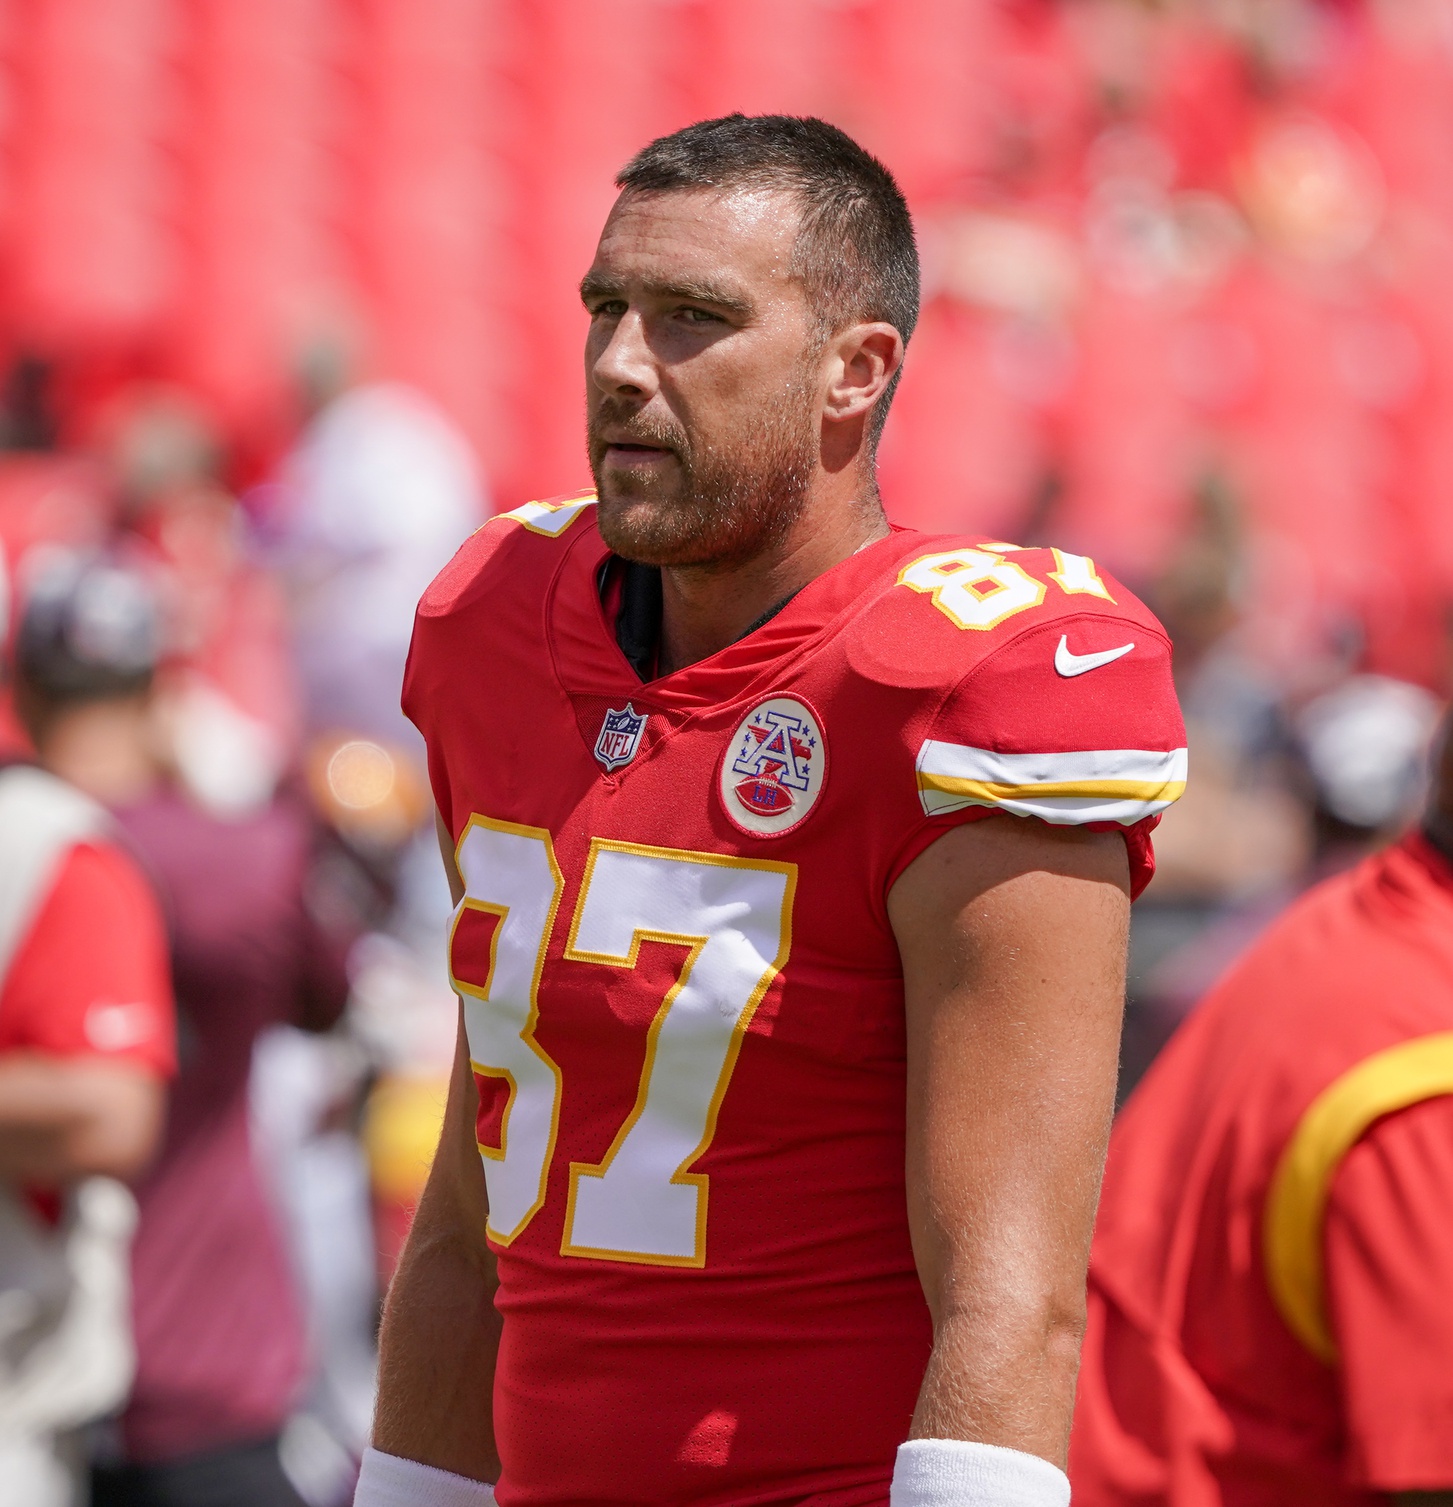 Kansas City Chiefs, Los Angeles Chargers to play Sept. 15 on